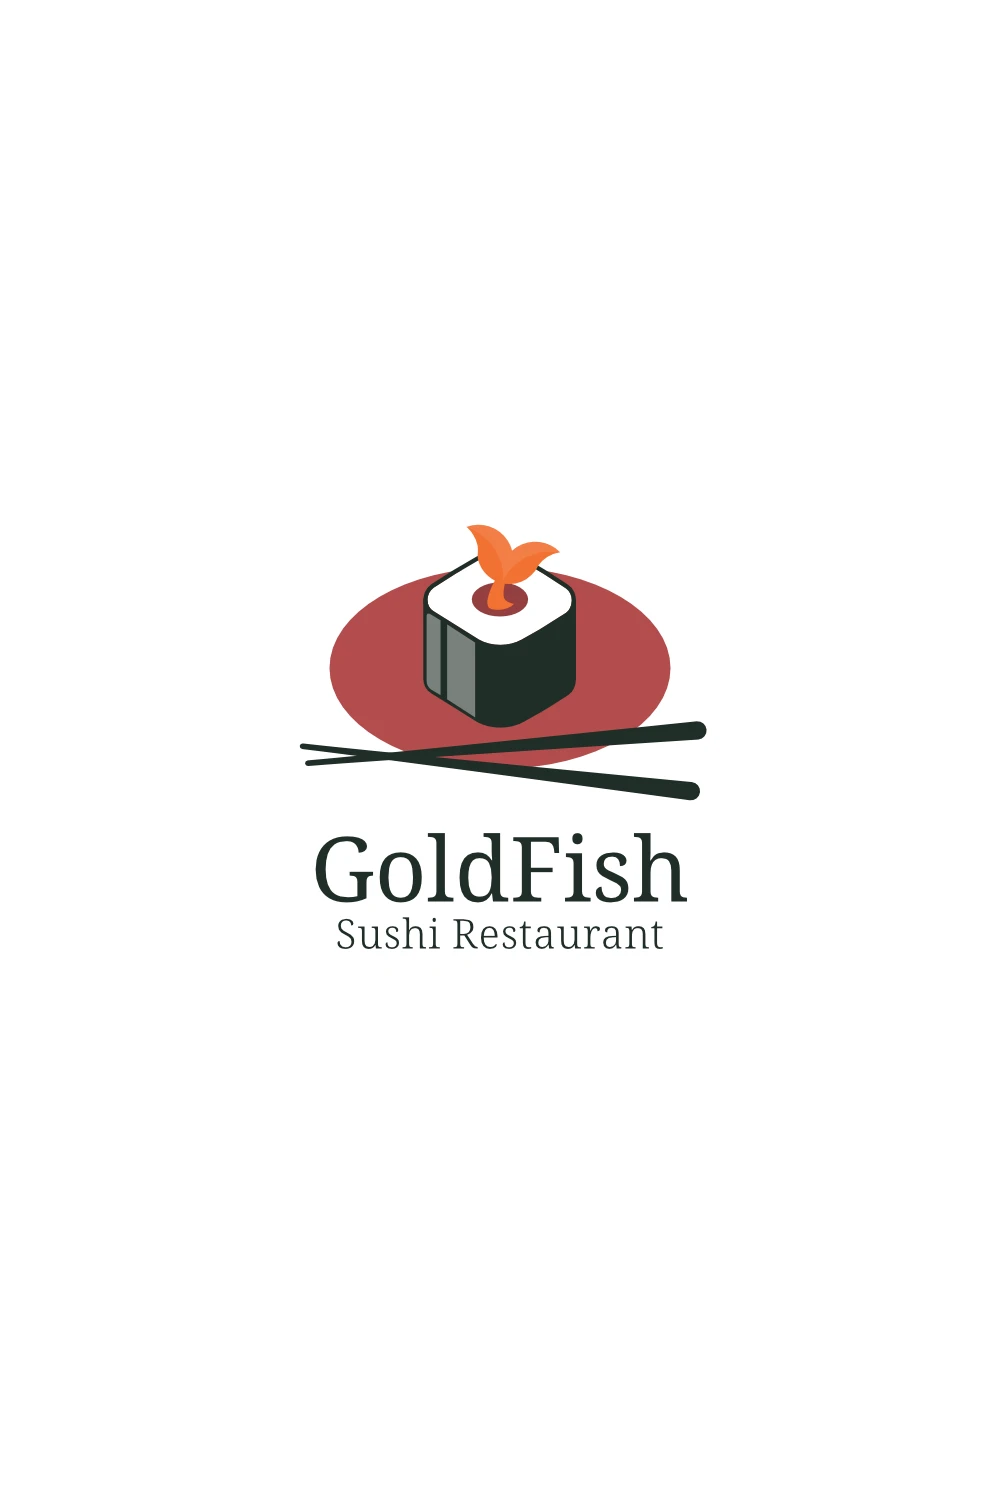 A Create a Memorable and Recognizable Logo Design showing a sushi maki with the tail of a goldfish sticking out. And the text "GoldFish Sushi Restaurant"